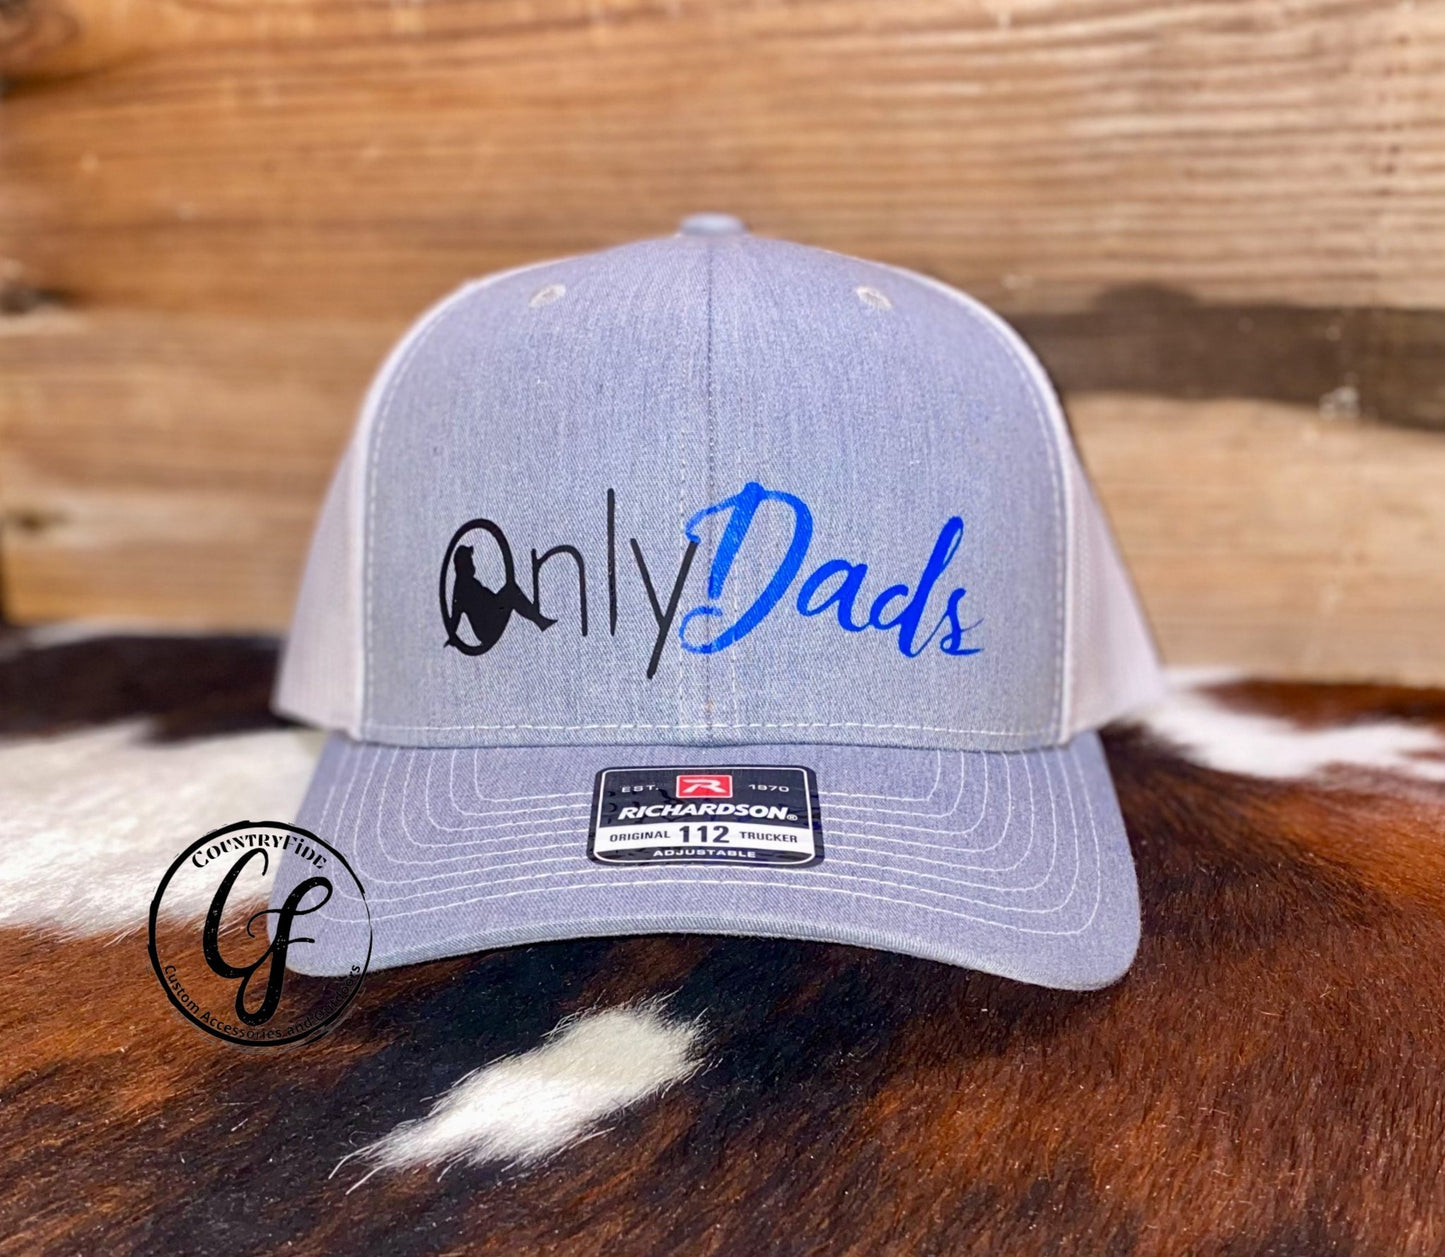 ONLY FOR DADS - CountryFide Custom Accessories and Outdoors